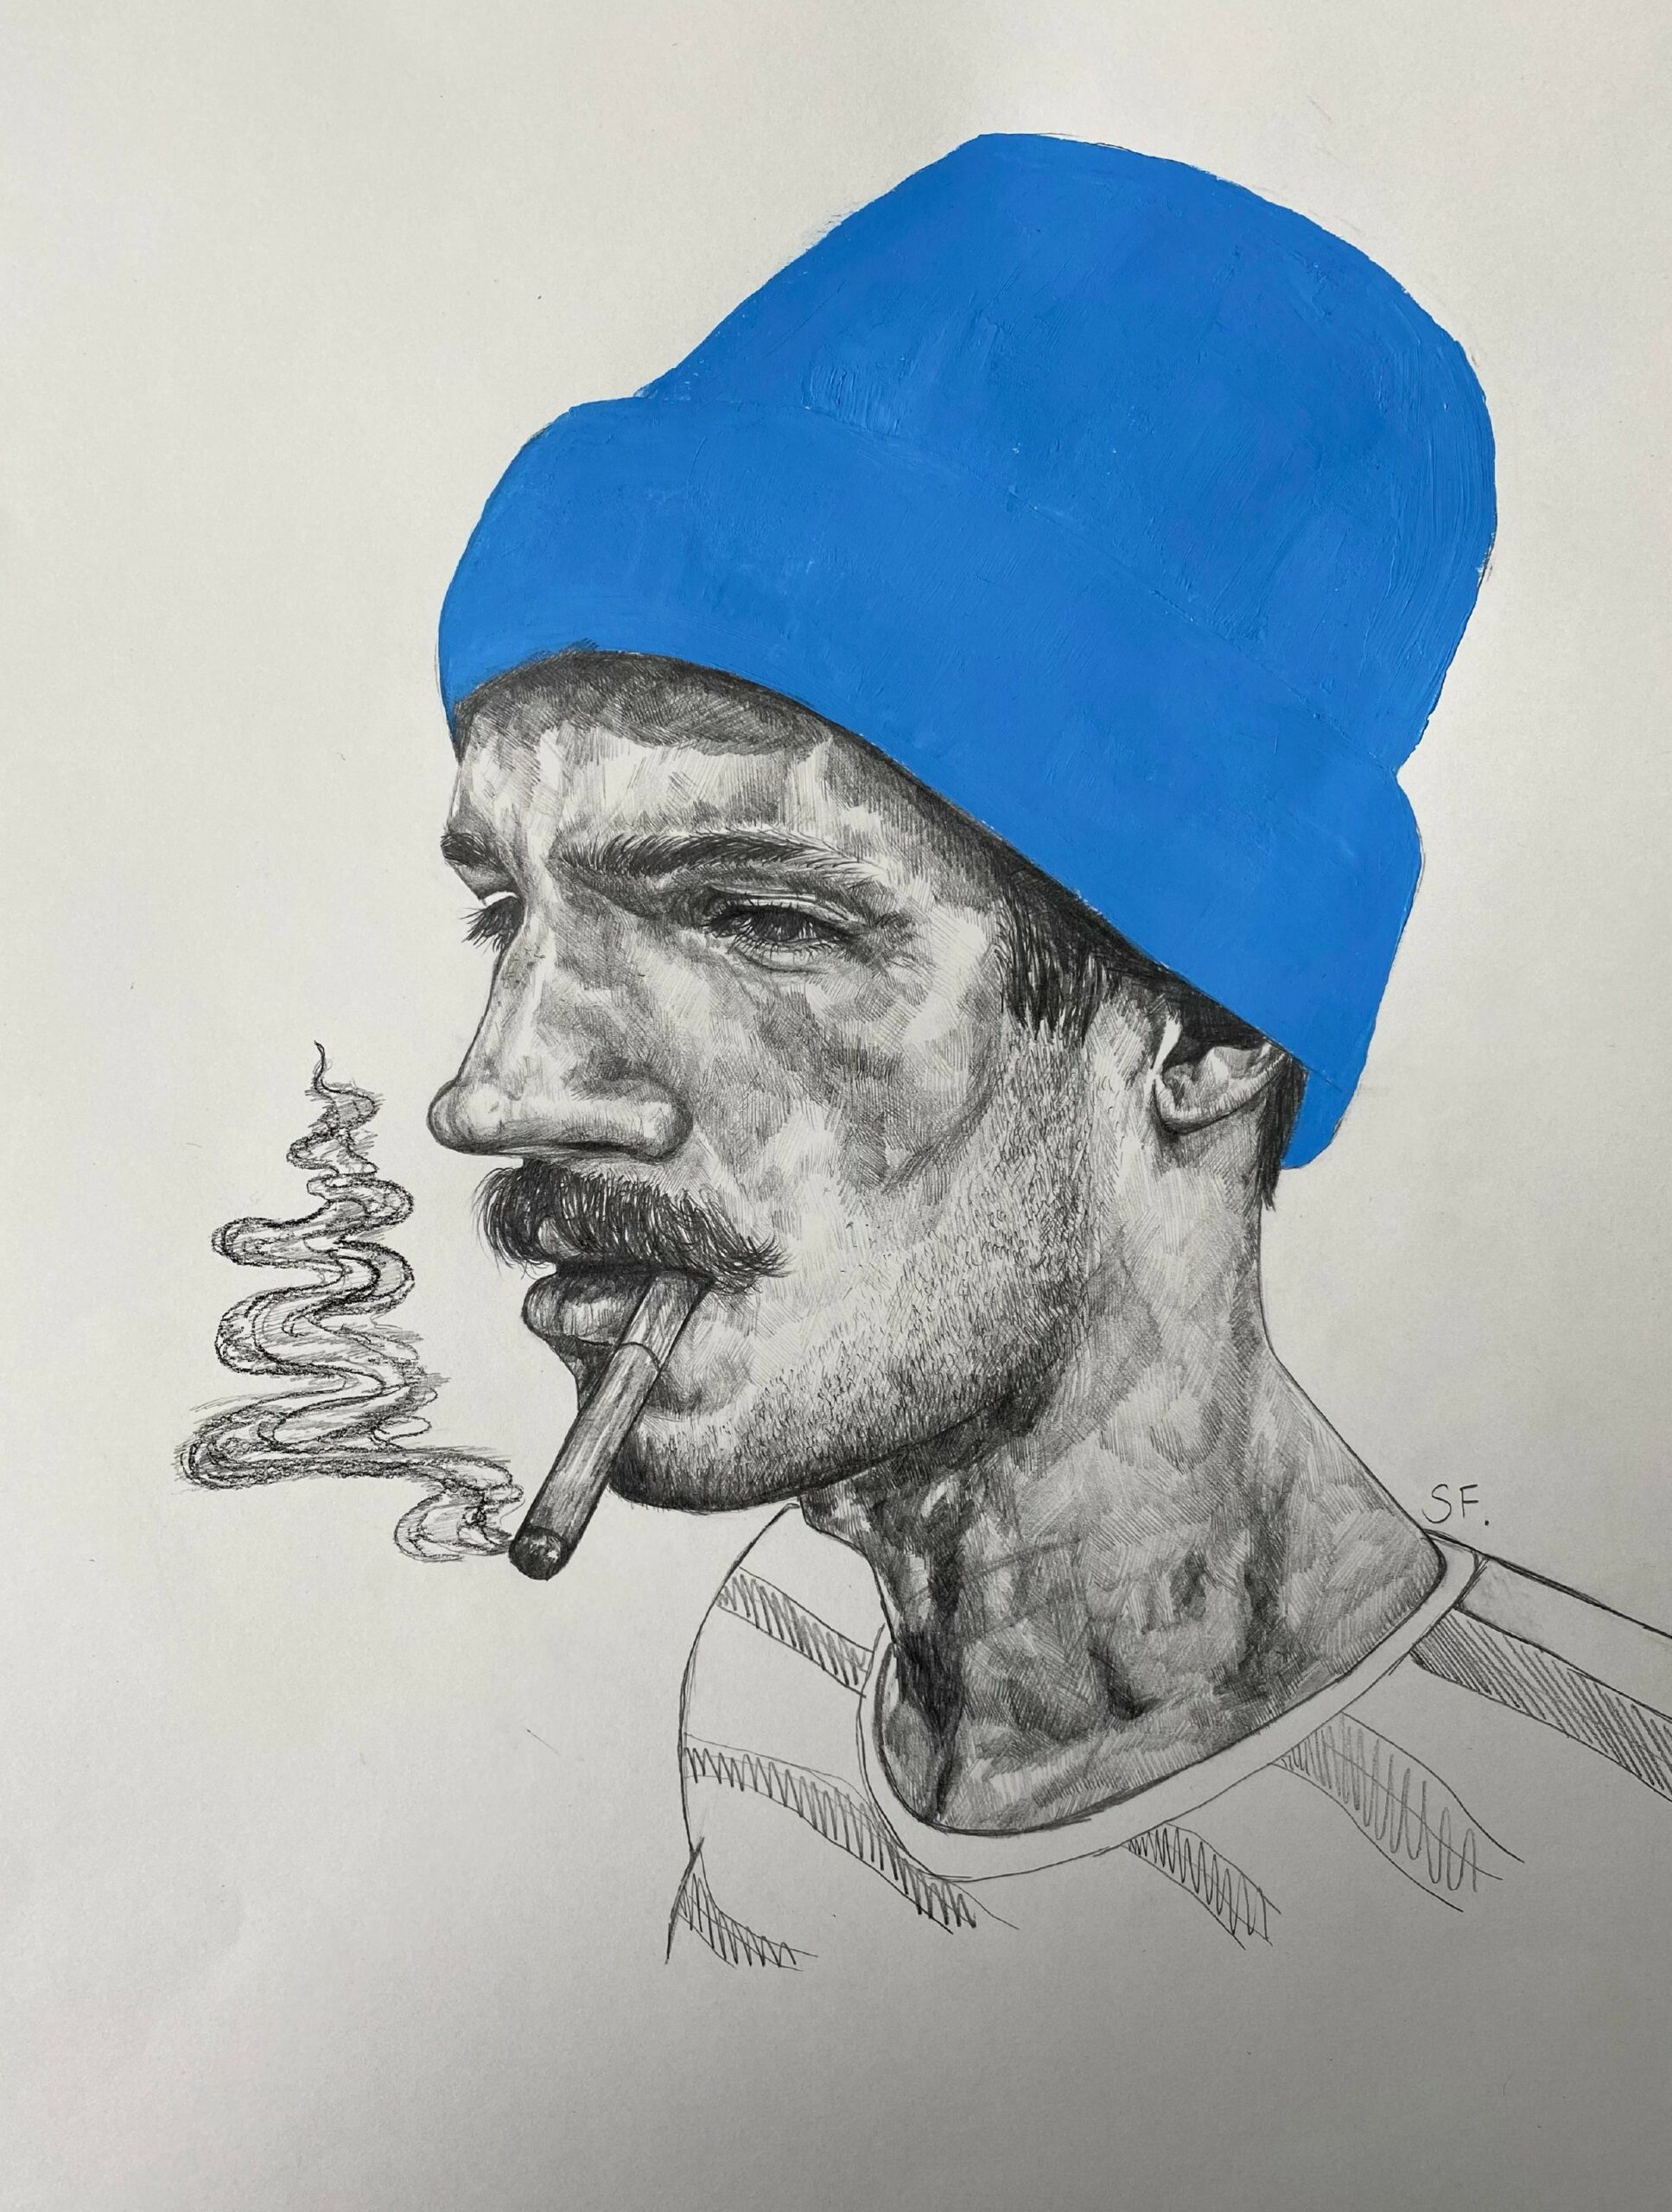 A man smoking a cigarette and wearing a blue beanie